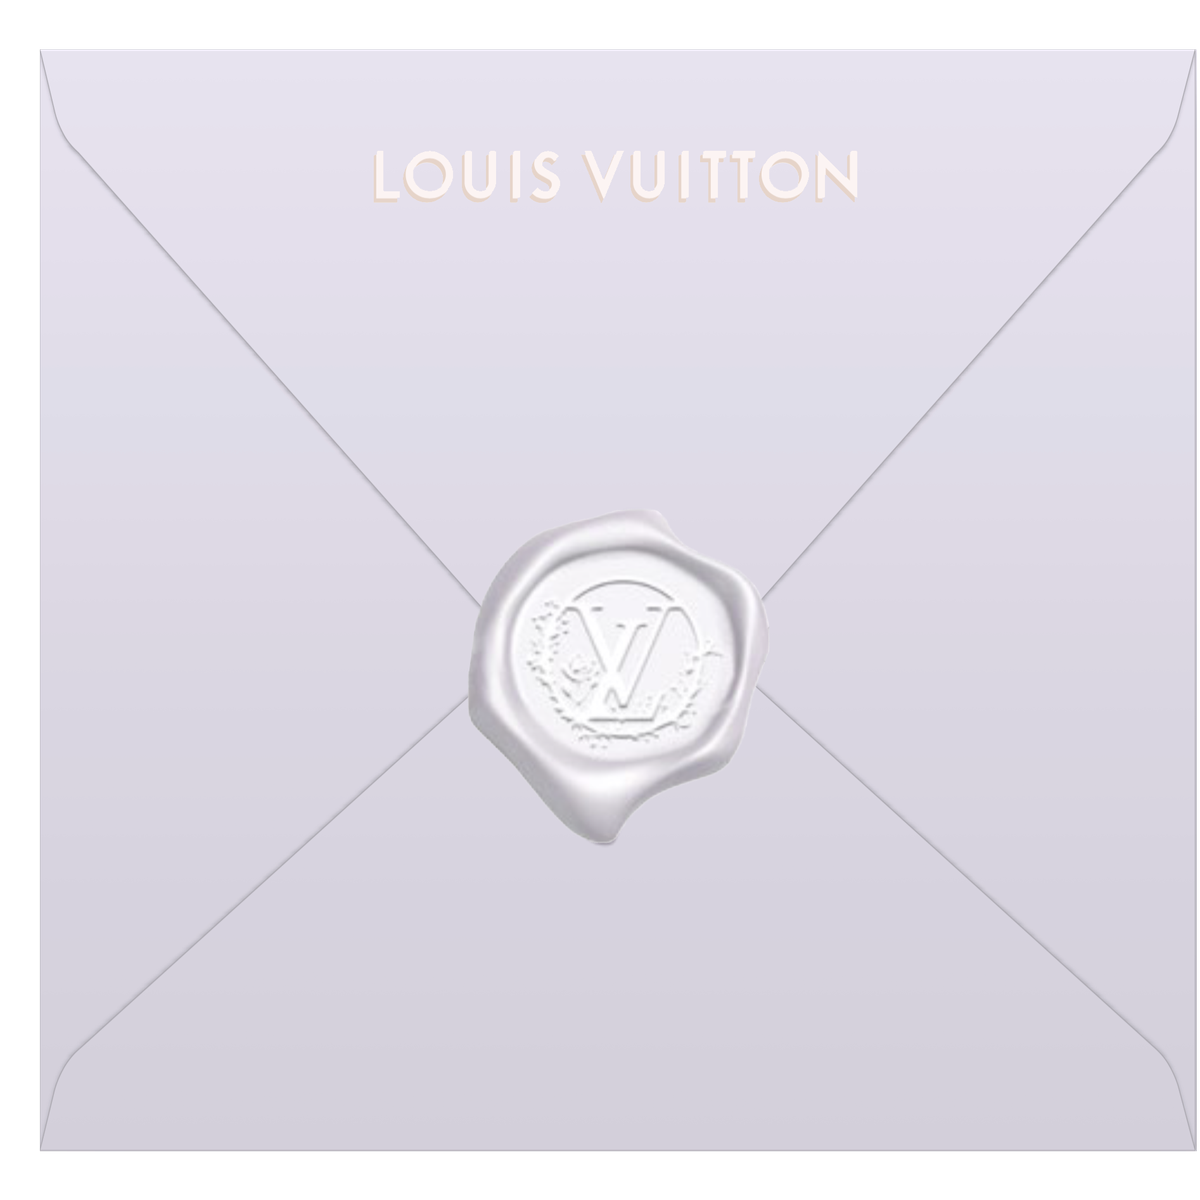 Louis Vuitton Launches Customizable Mother's Day E-Cards